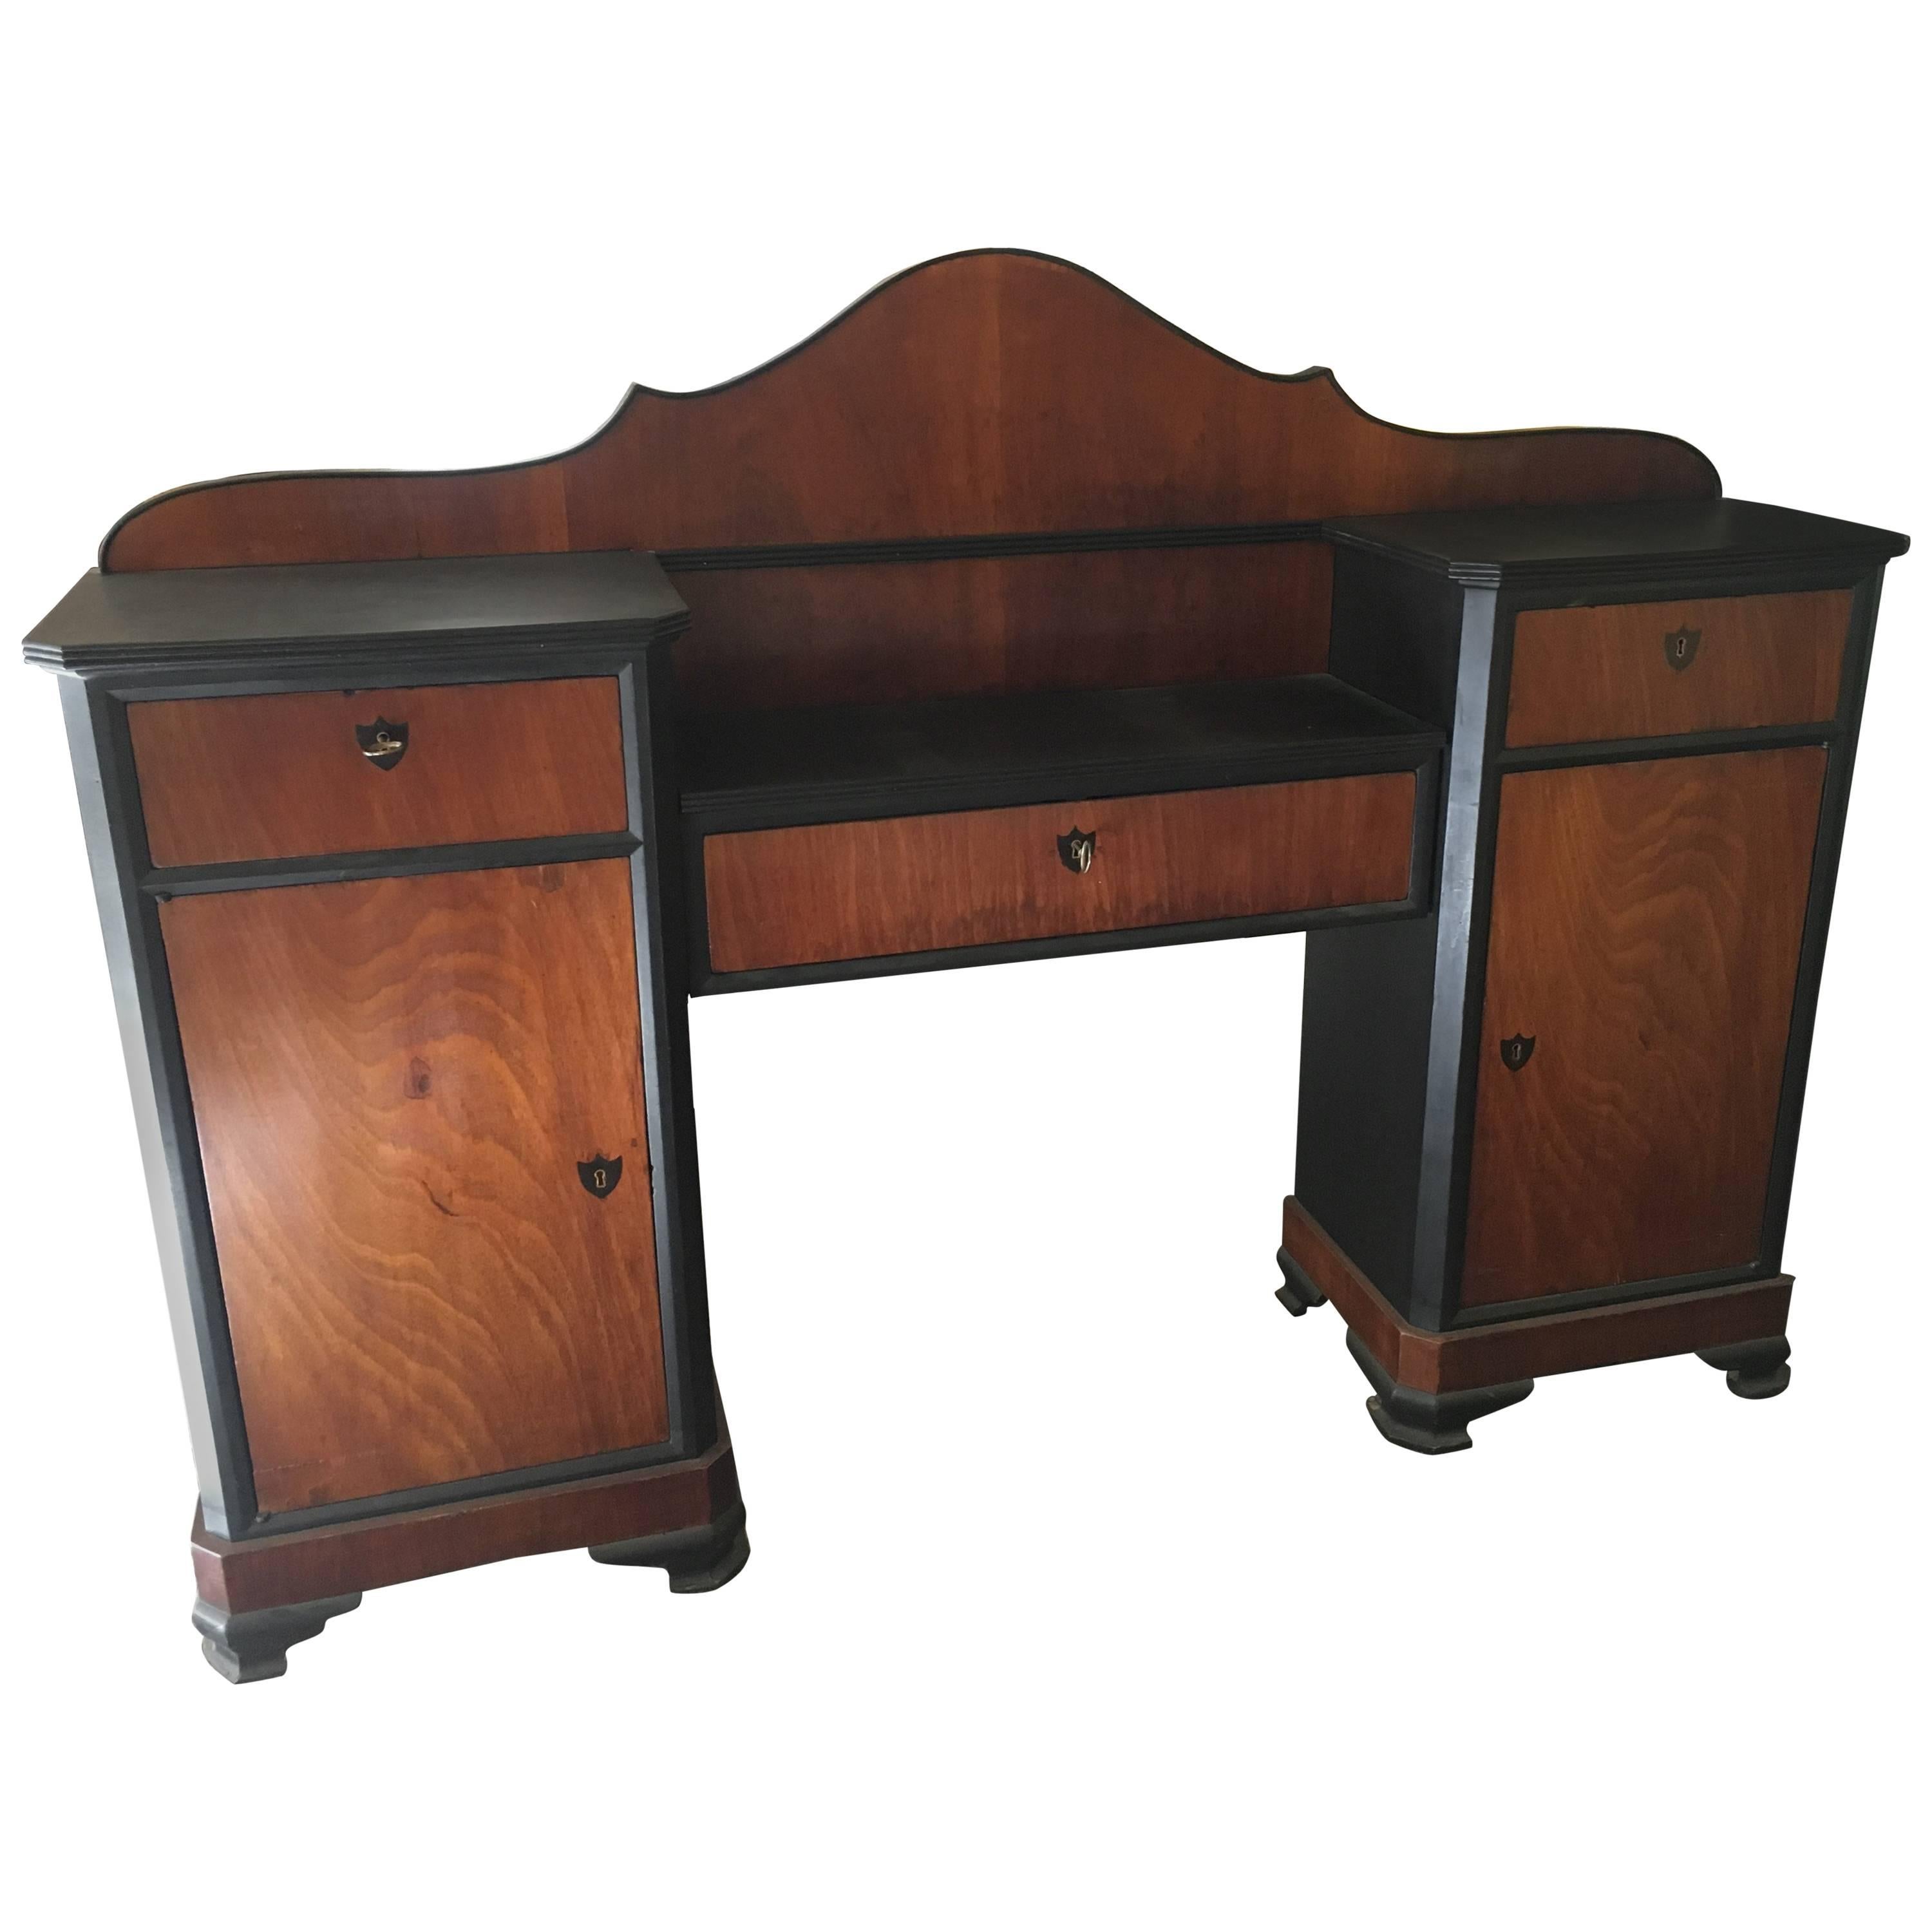 English Mahogany Console with Shutters and Drawers from 1940s